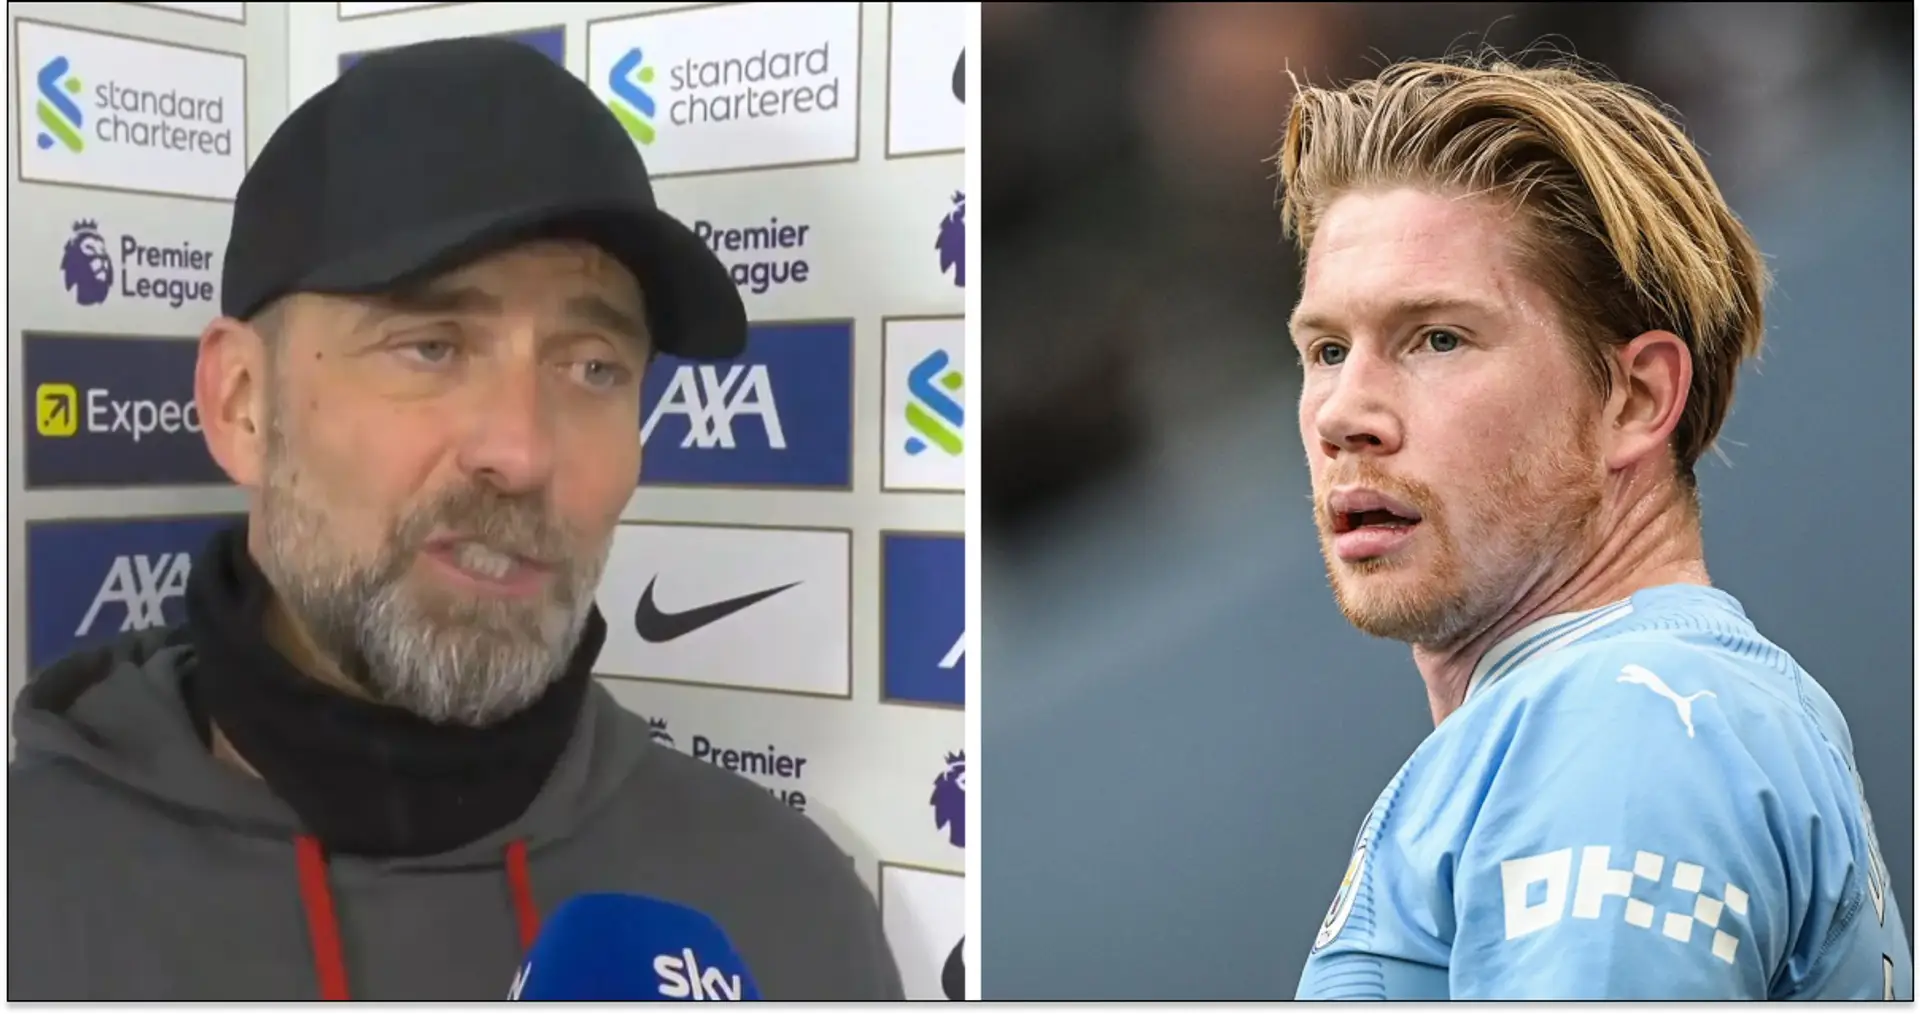 'You could've built a legacy here': Klopp & De Bruyne share warm moment before Liverpool v City